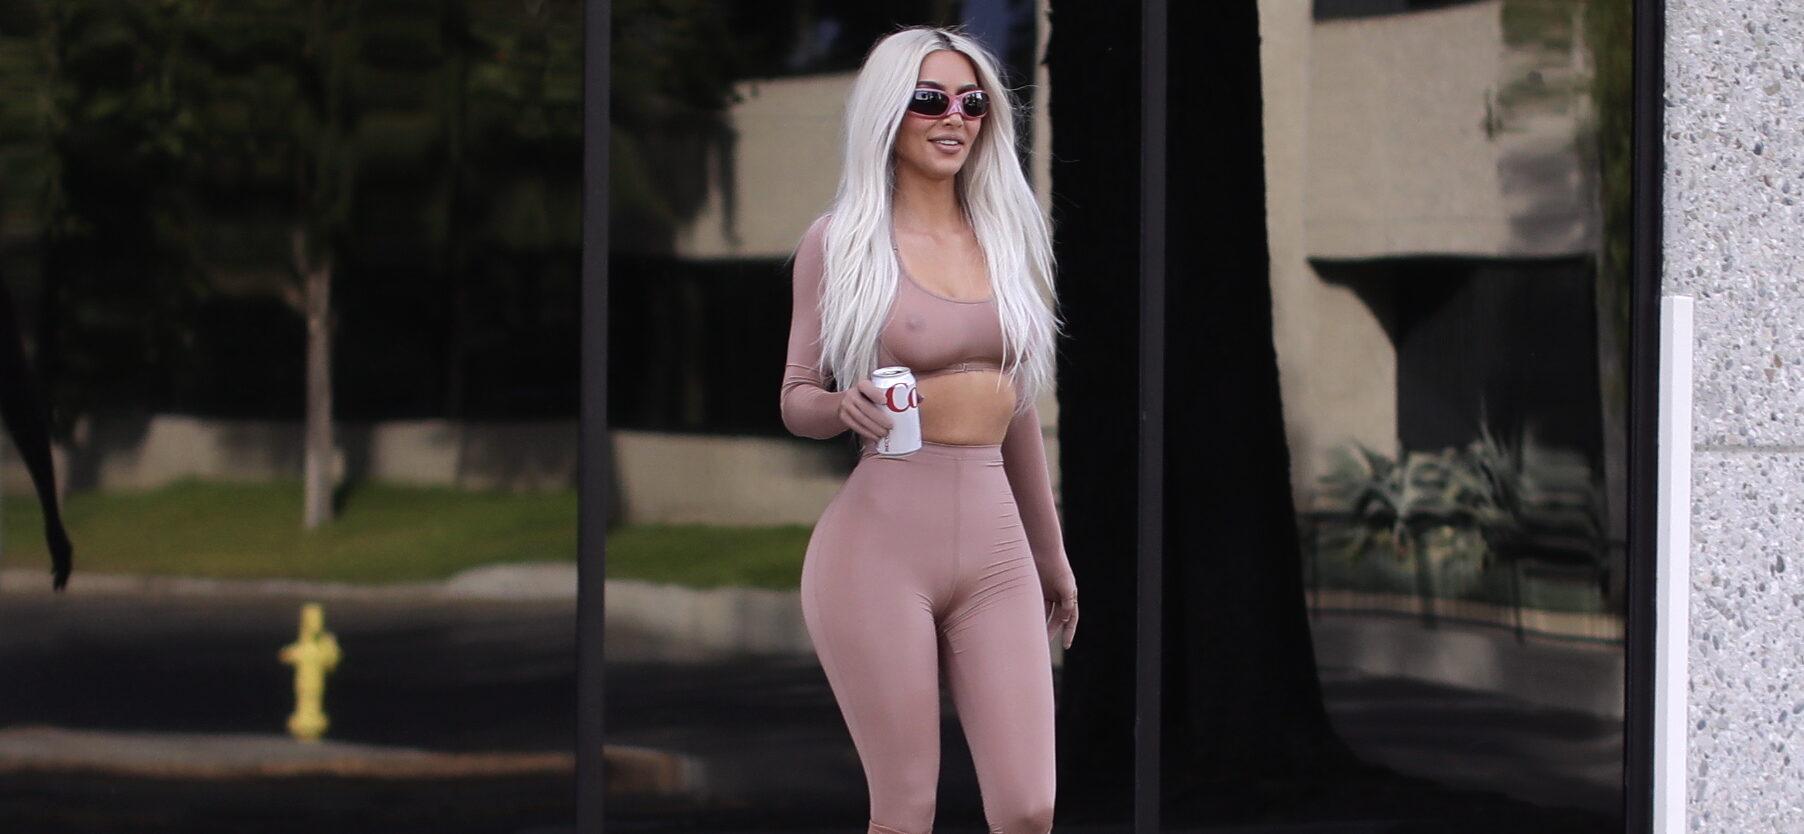 Kim Kardashian is all smiles as she shoot for her SKIMS line at a studio as she is joined by Pete Davidson briefly and glam squad in LA